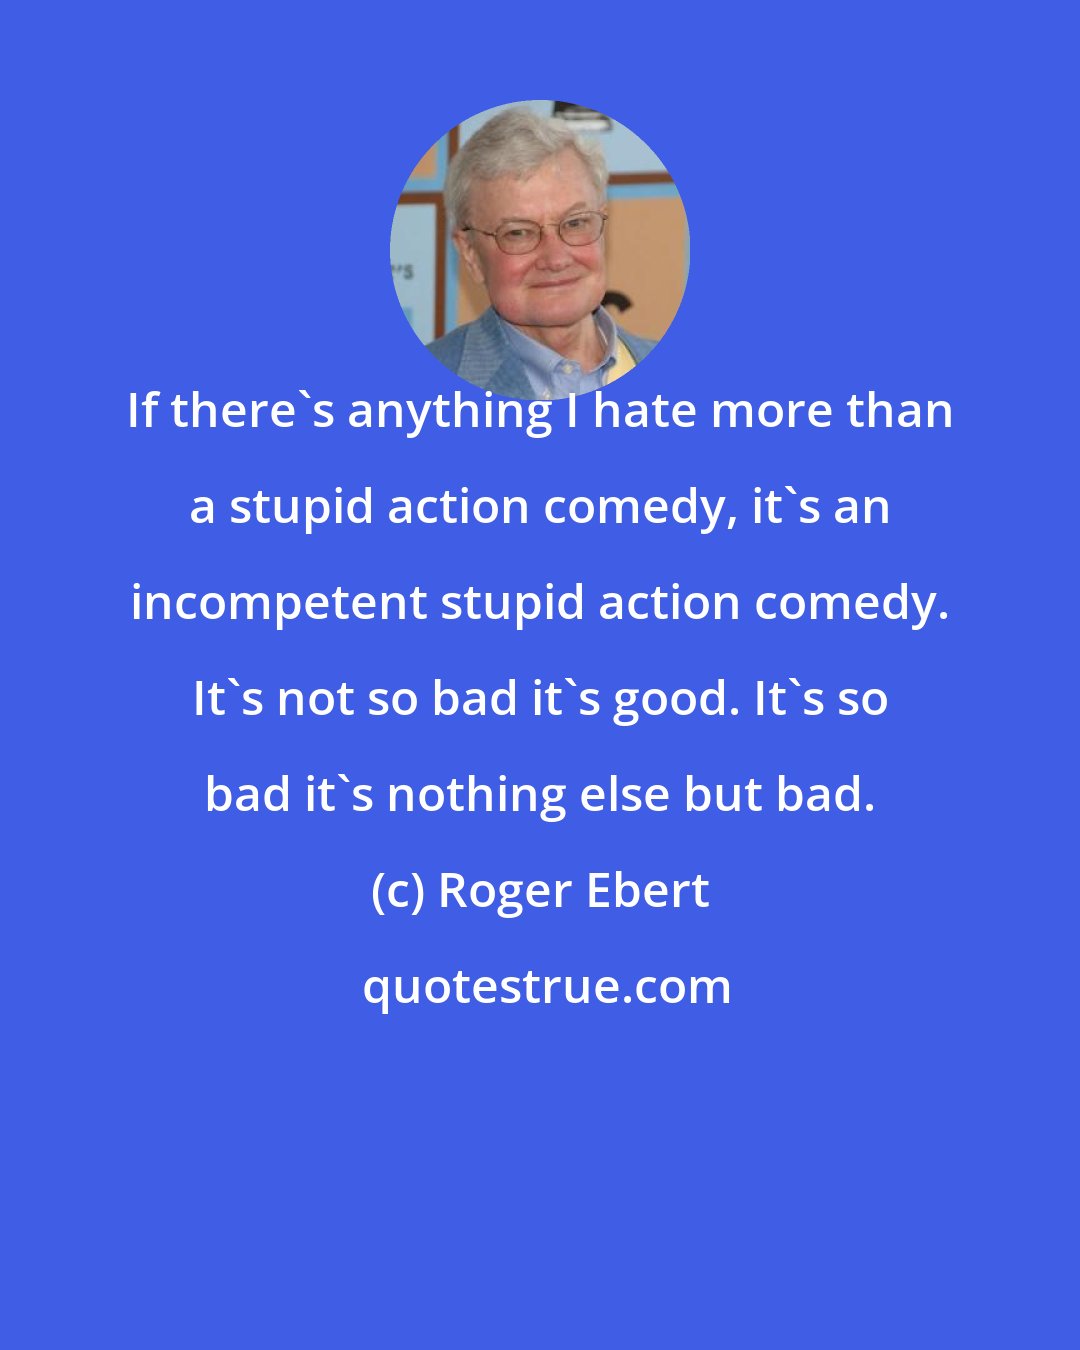 Roger Ebert: If there's anything I hate more than a stupid action comedy, it's an incompetent stupid action comedy. It's not so bad it's good. It's so bad it's nothing else but bad.